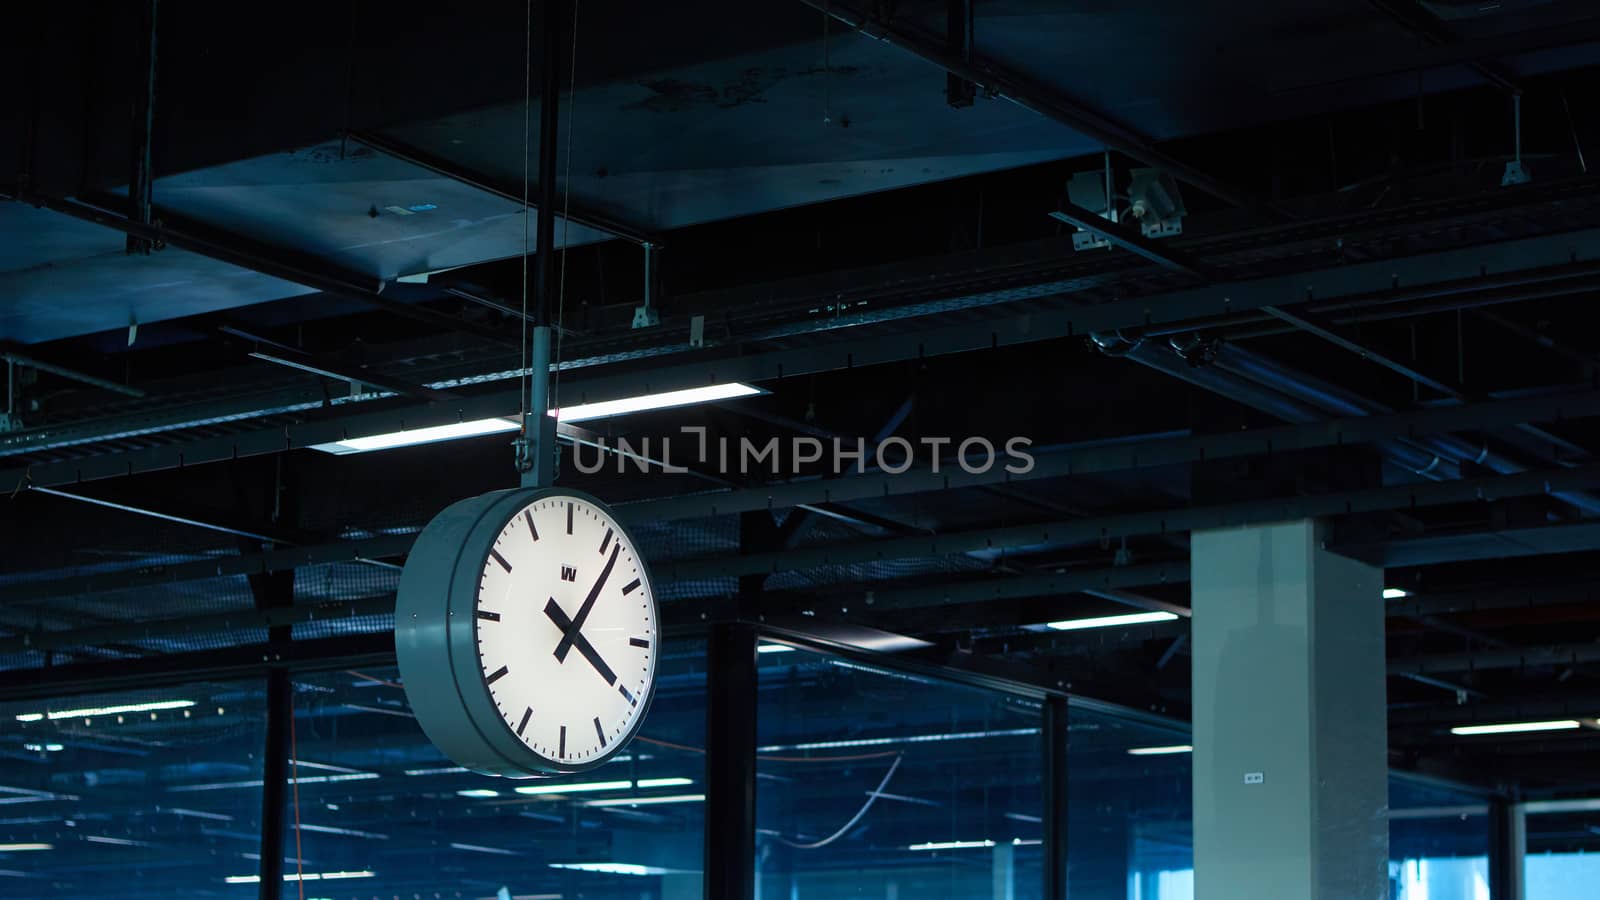 Amsterdam, Netherlands - March 11, 2016: Amsterdam Airport Schiphol in Netherlands. The clock in terminal